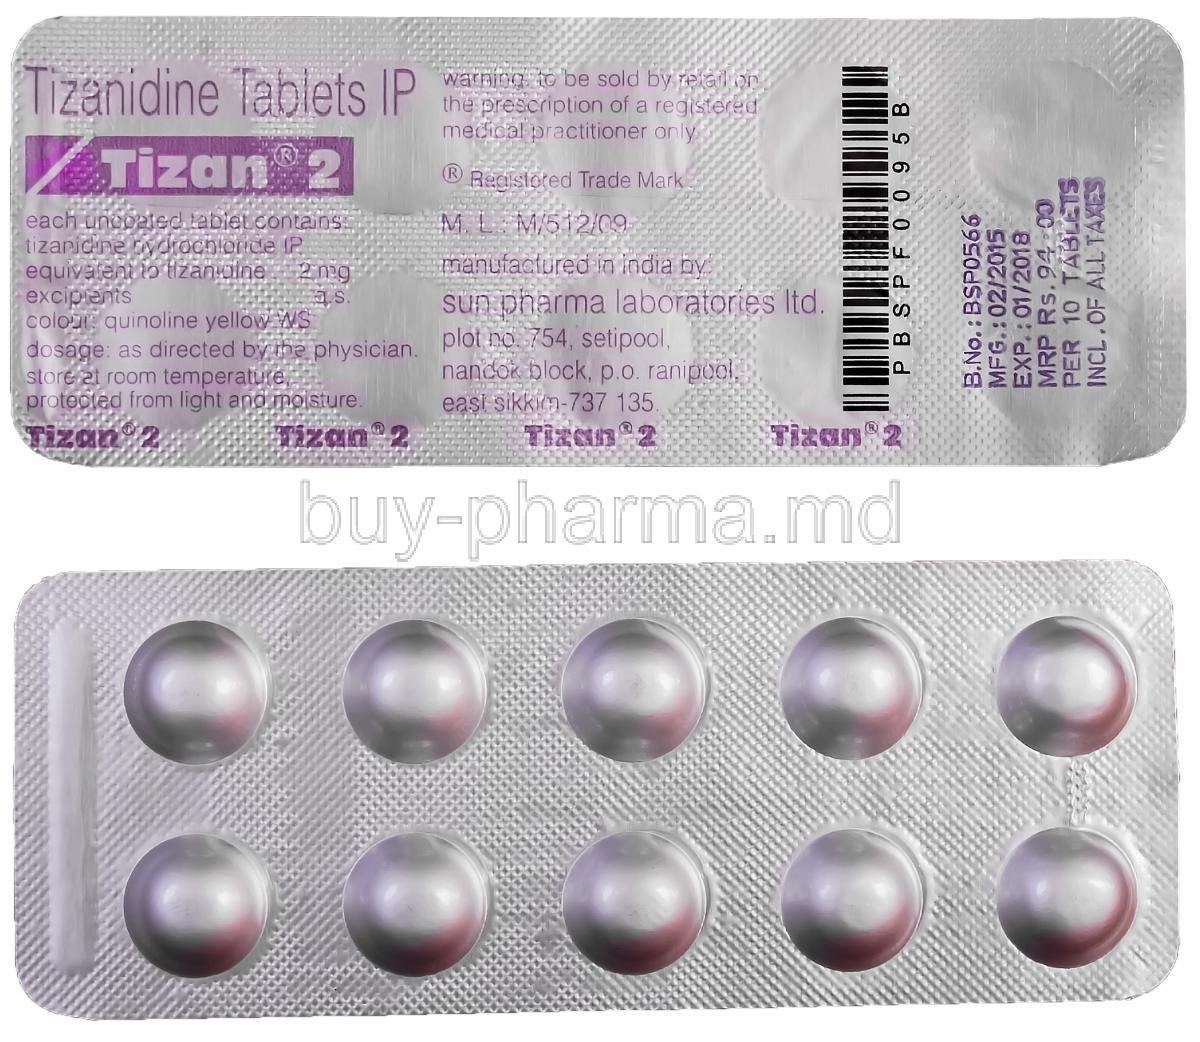 Discover how to buy Tizanidine safely and effectively, as we explore ...